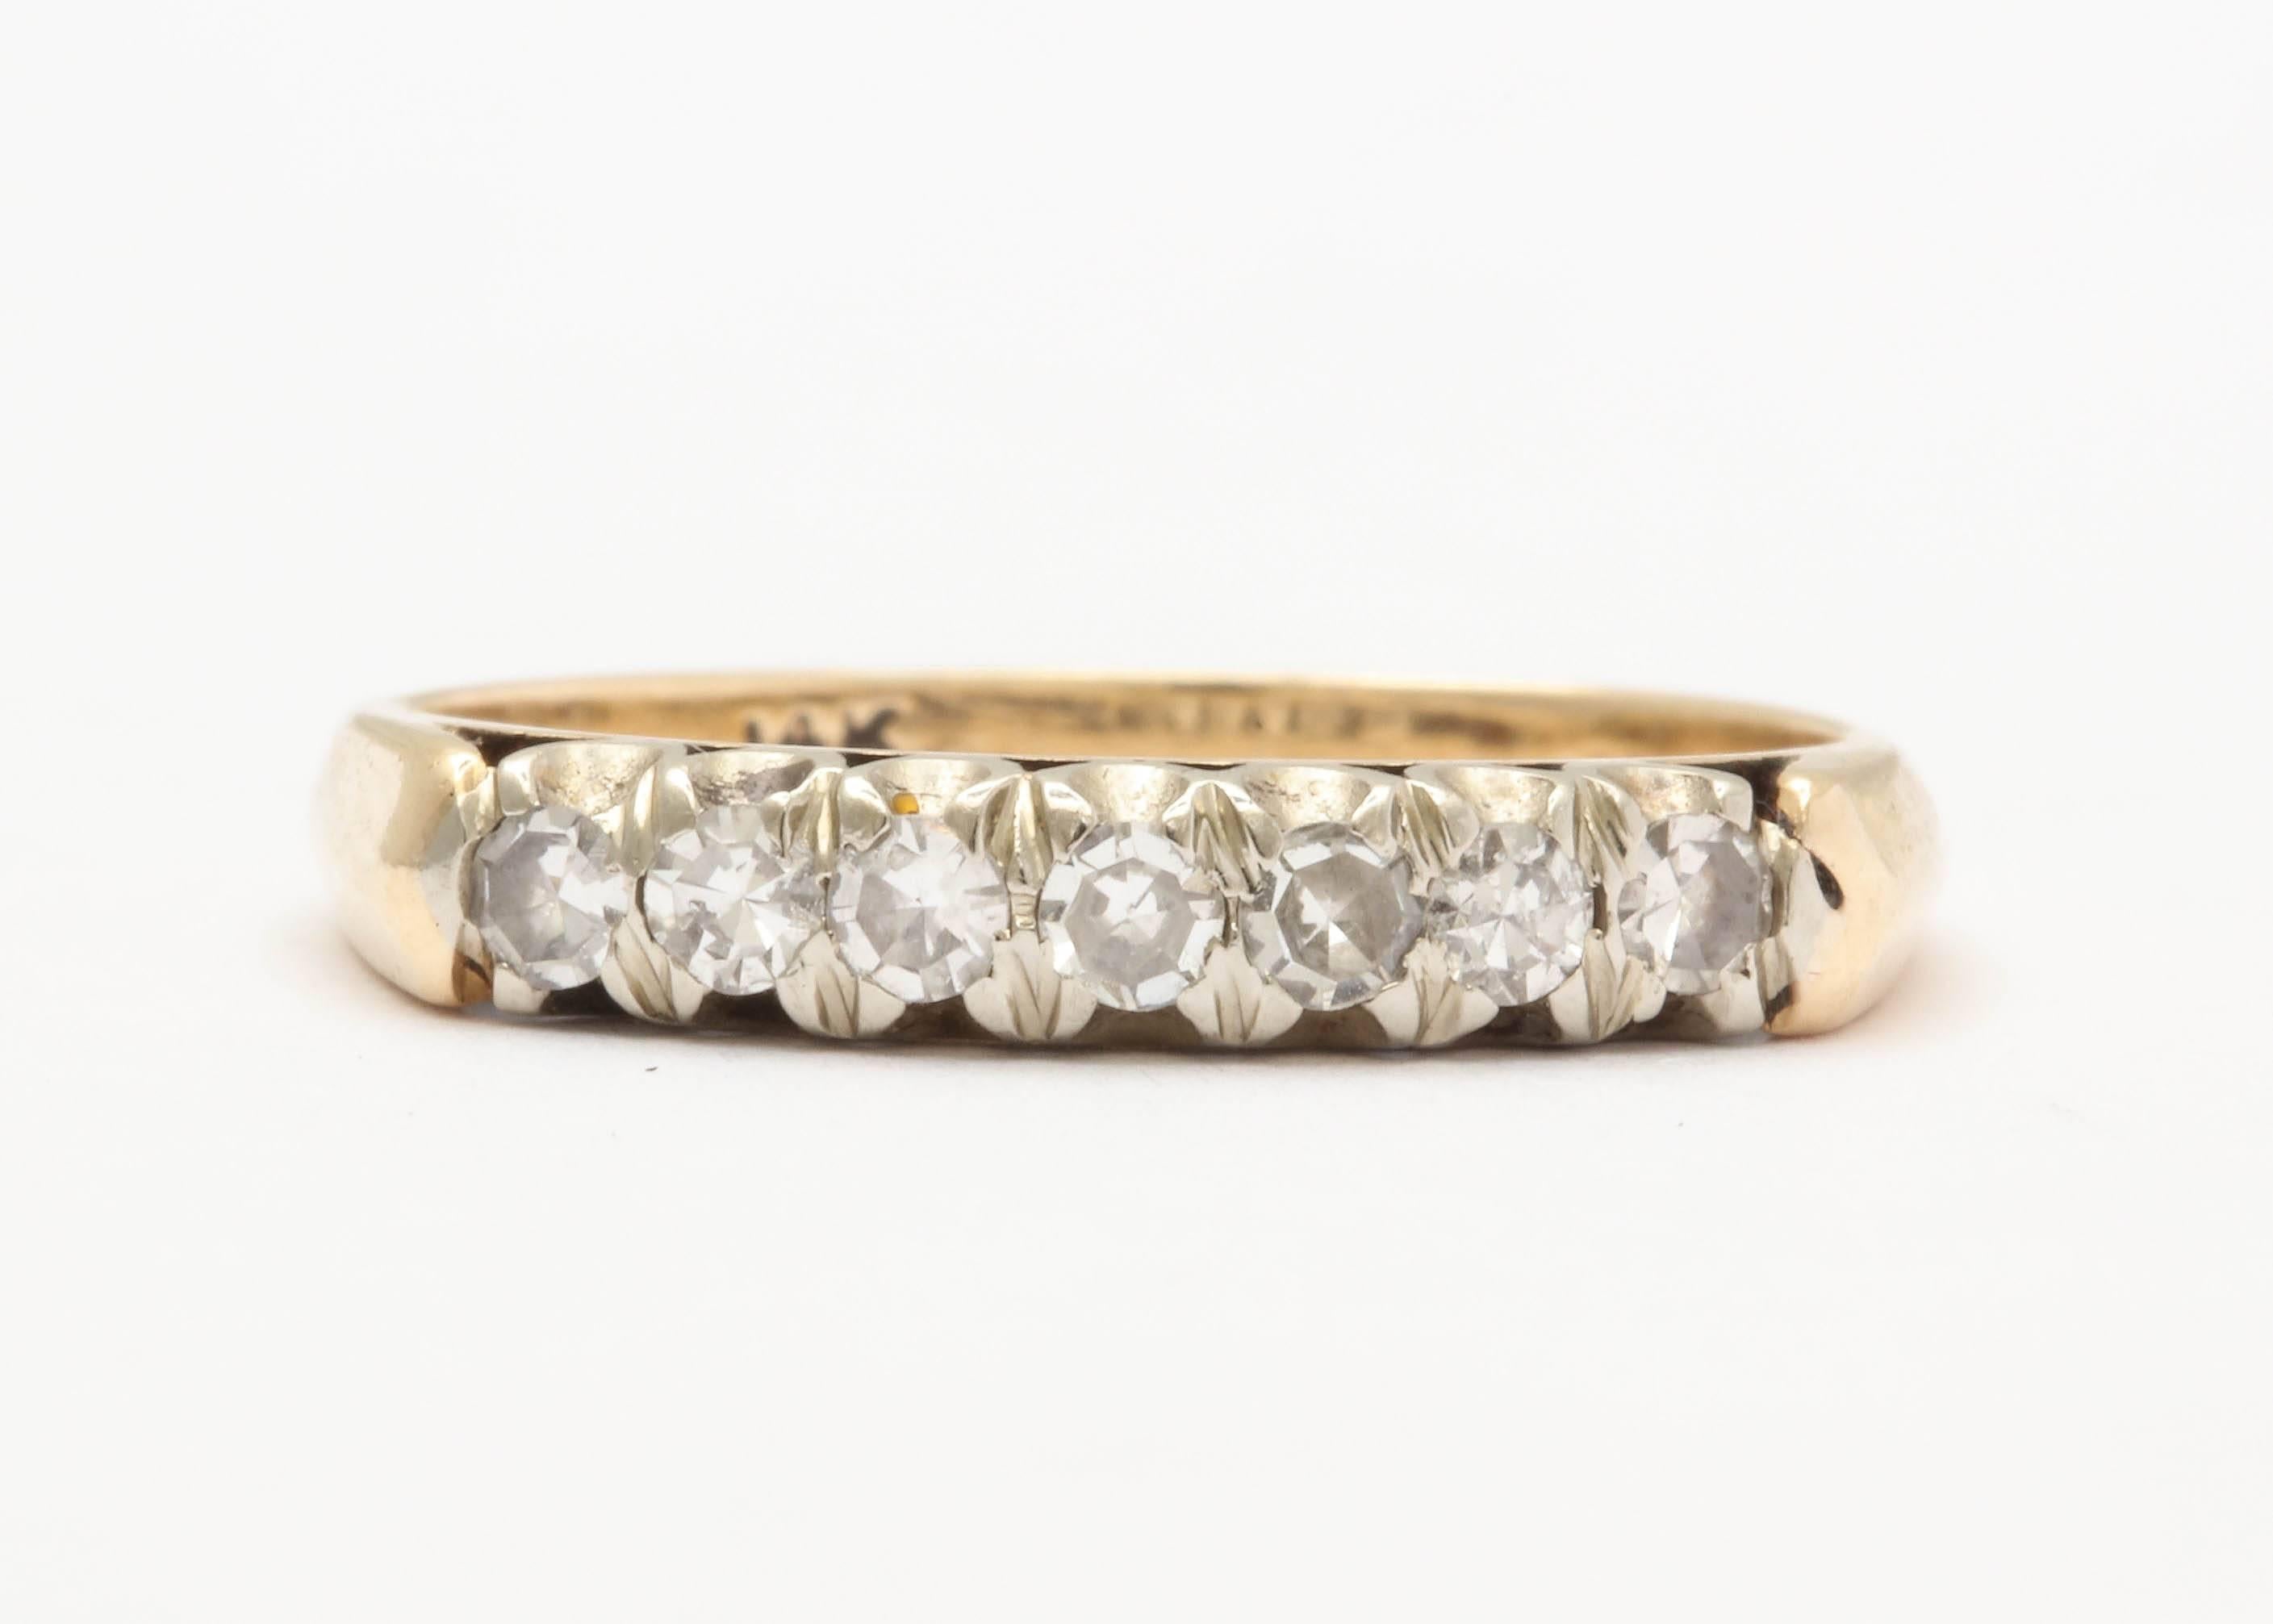 7 Diamonds are set in white gold atop a yellow gold band in this simple and pretty setting. Easy to wear as flat on the sides- perfect for stacking! Approximately .40-.45 total carat weight. 